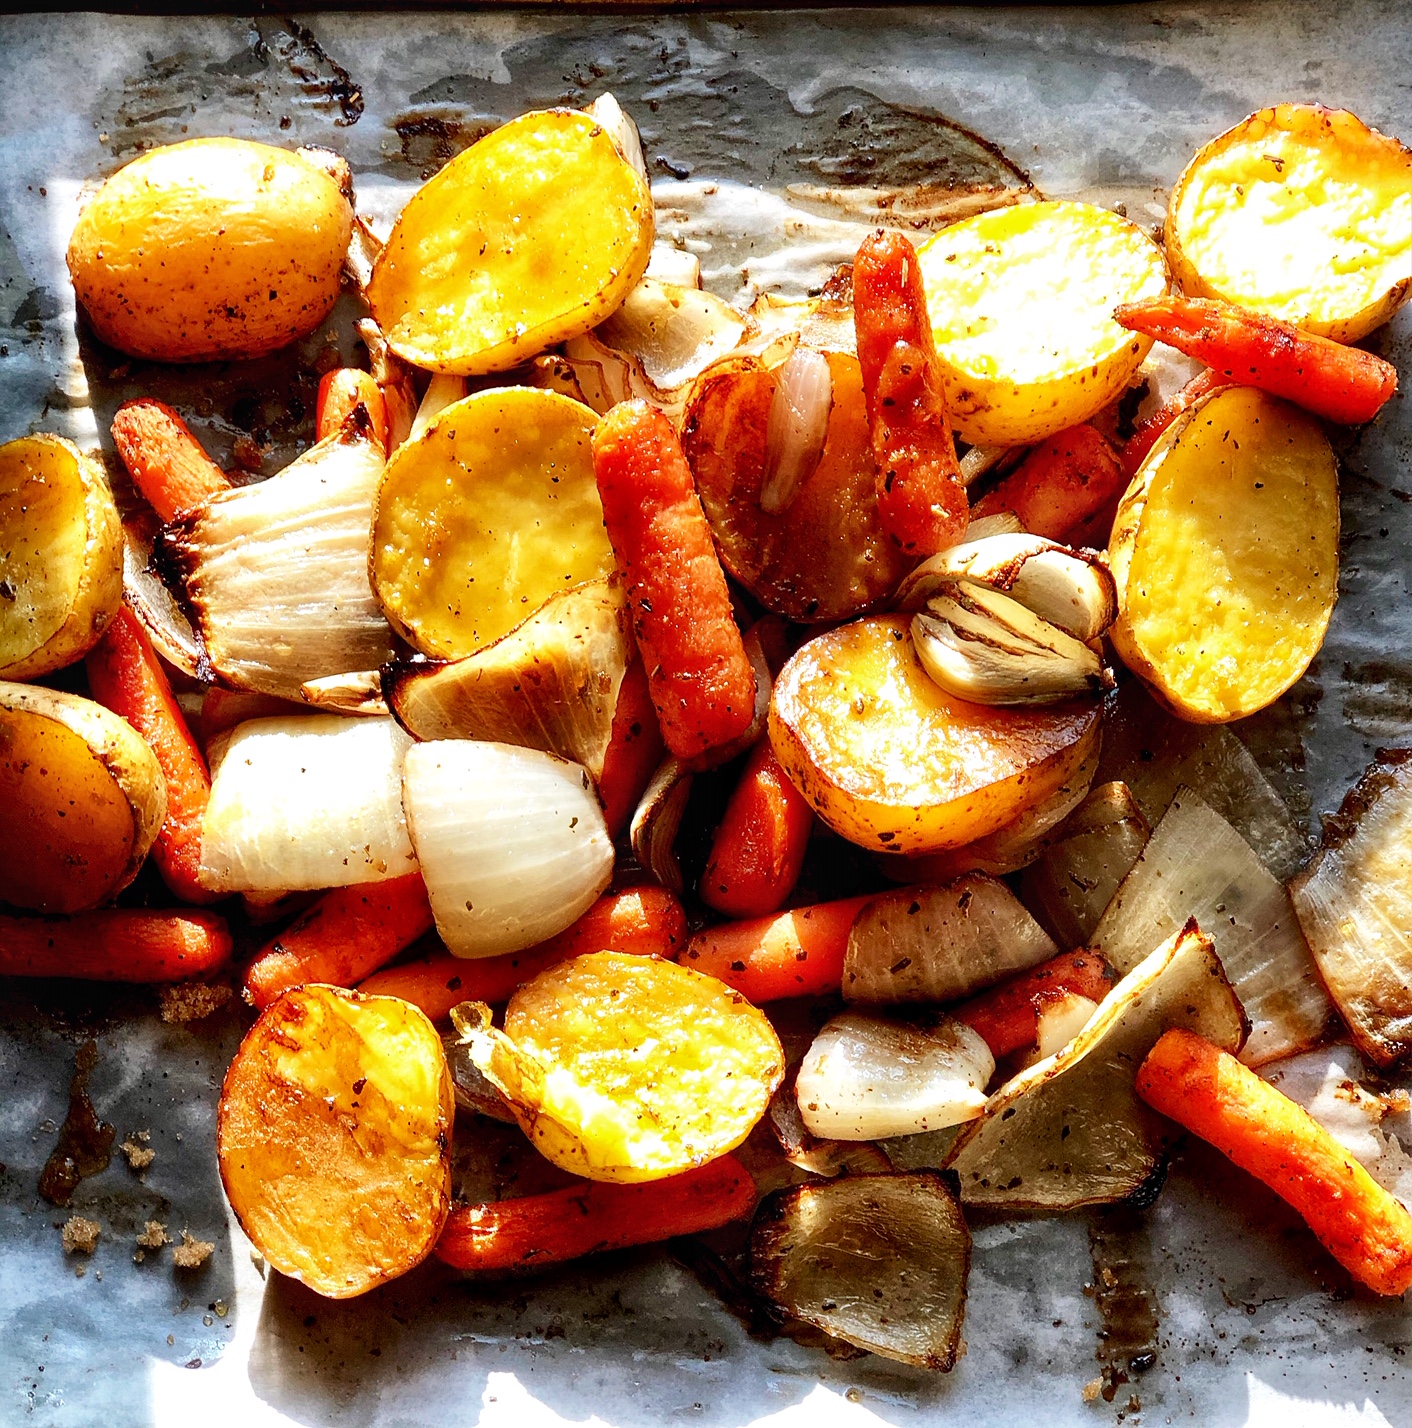 Roasted Potatoes, Onions, and Carrots with Brown Sugar and Balsamic Vinegar